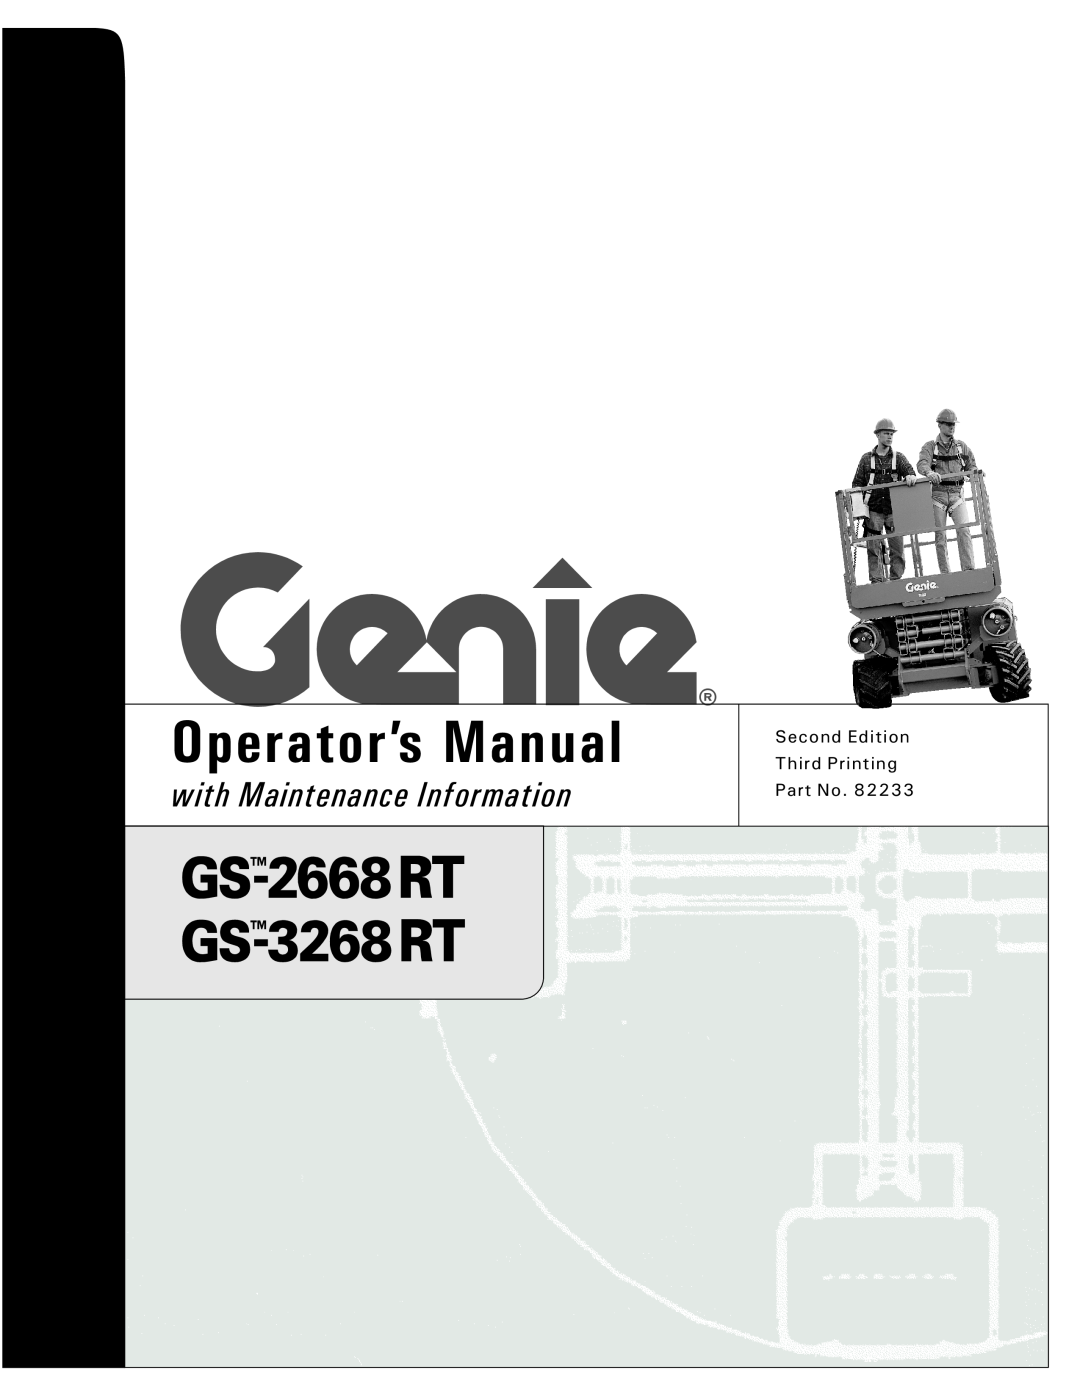 Genie GS-3268 RT, GS-2668 RT manual Operator’s Manual, with Maintenance Information, Second Edition Third Printing 